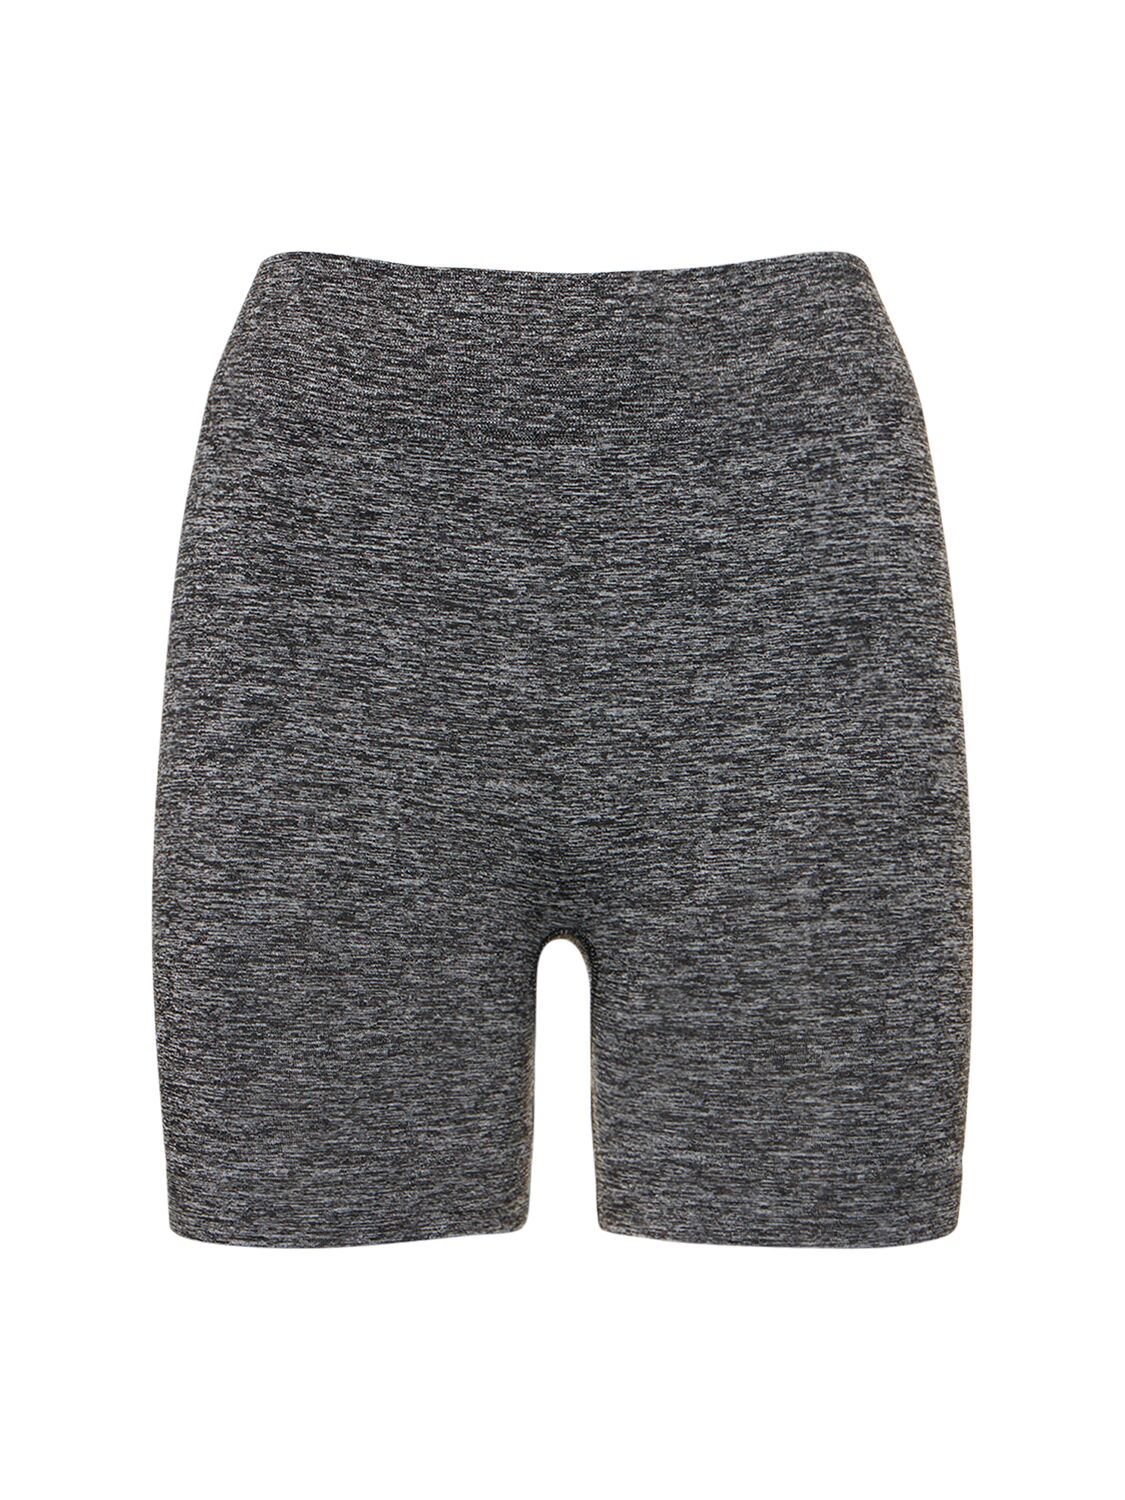 Prism Squared Composed Biker Shorts In Grey